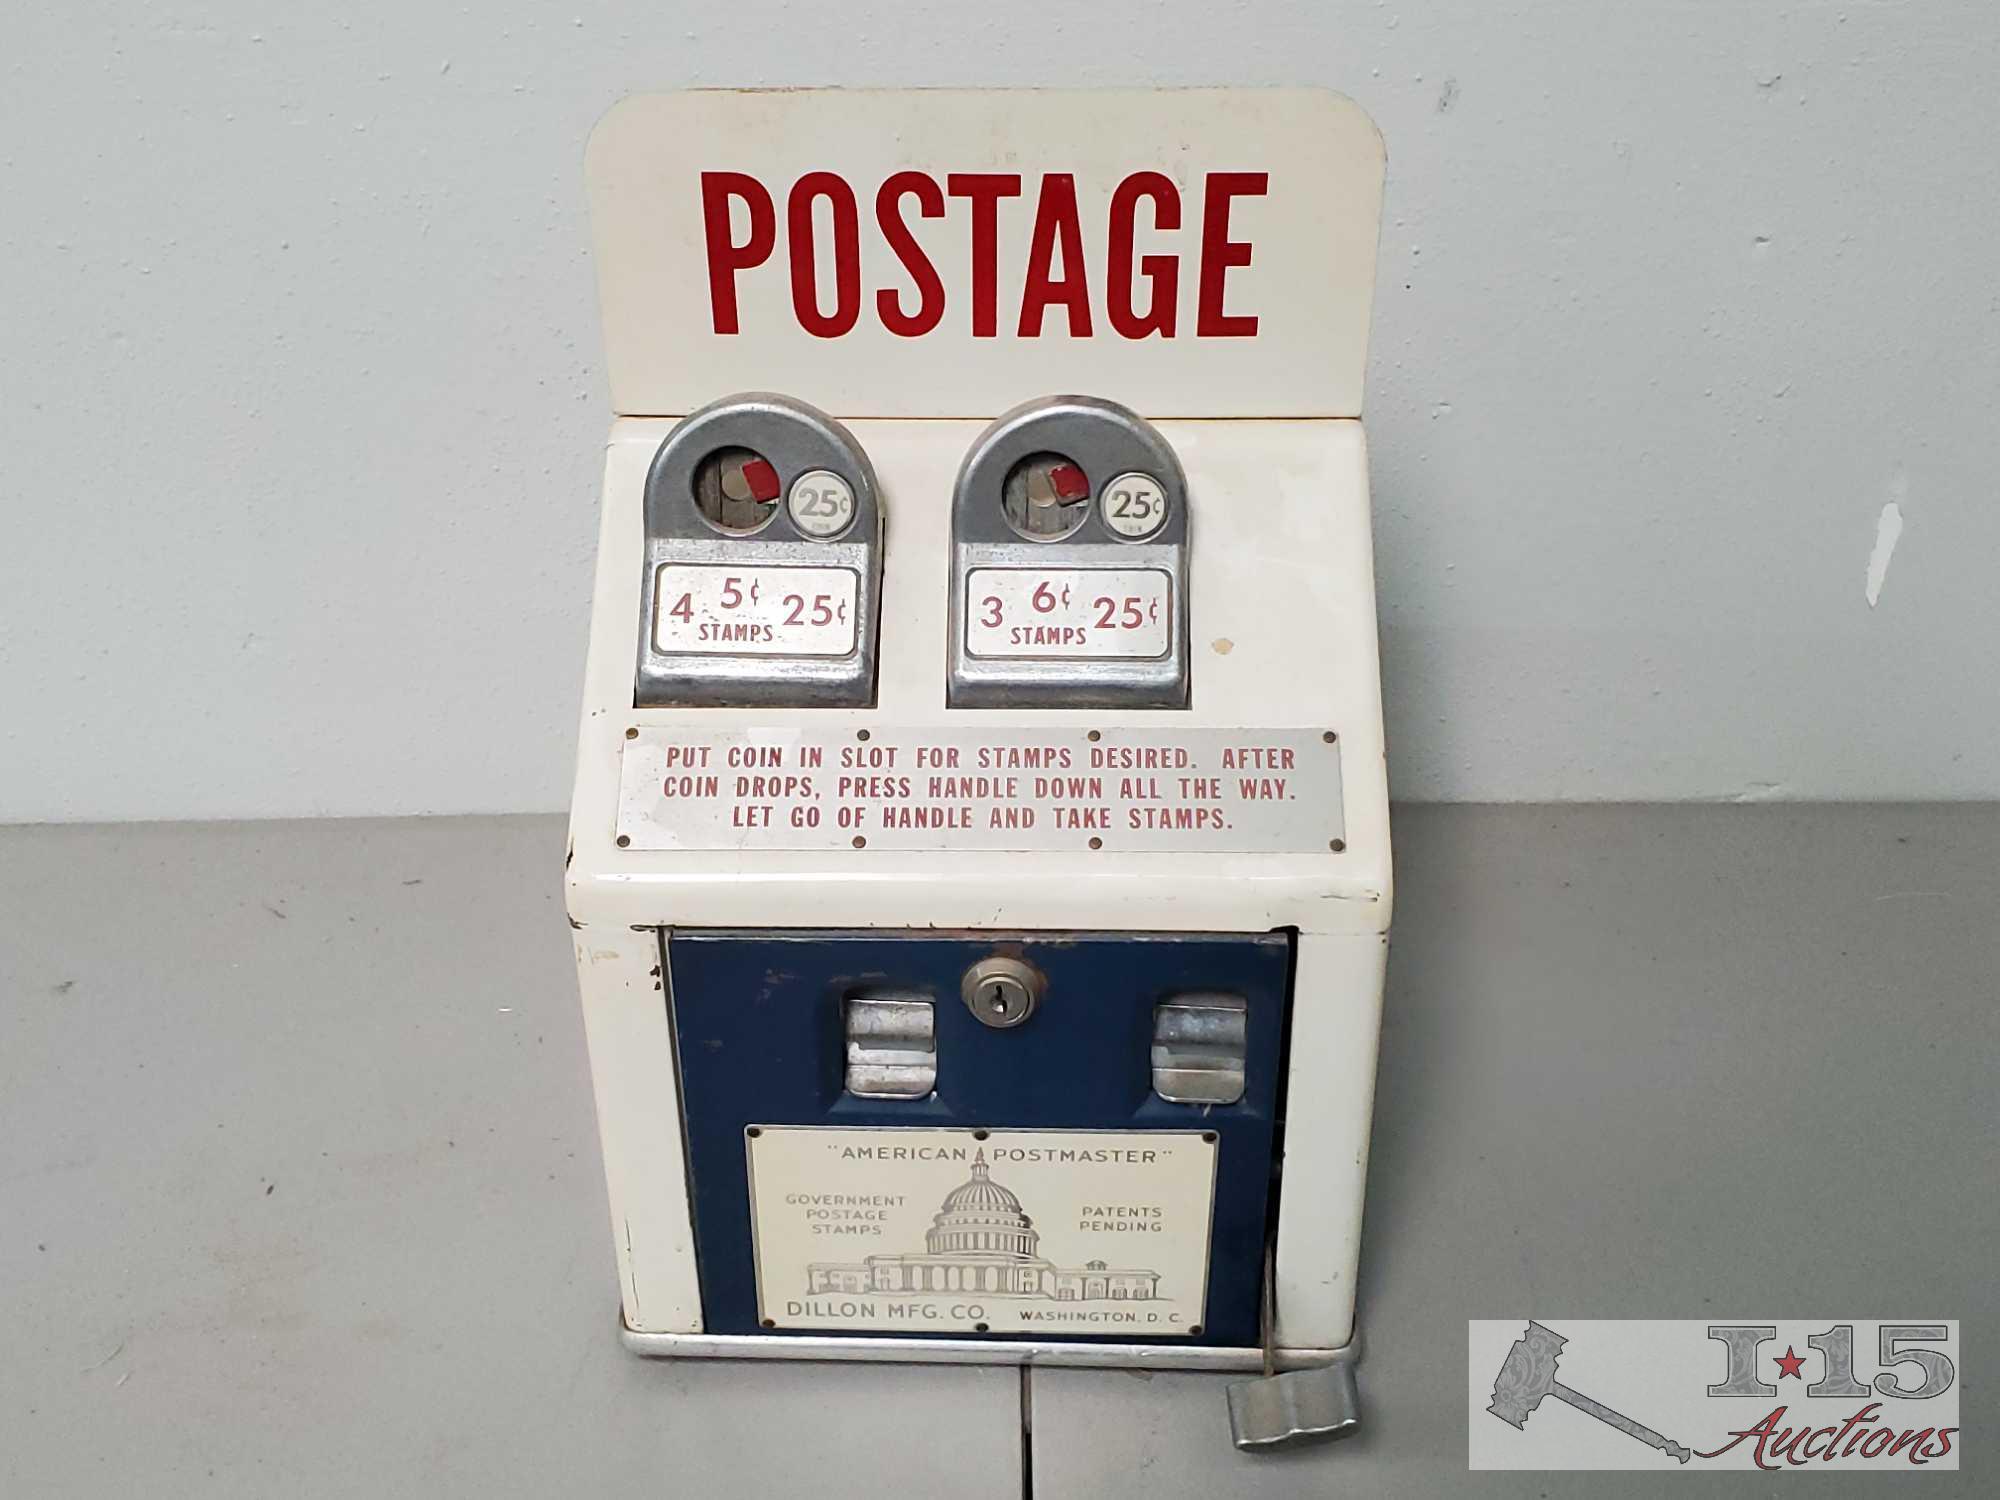 American Postmaster Postage Stamp Dispenser by